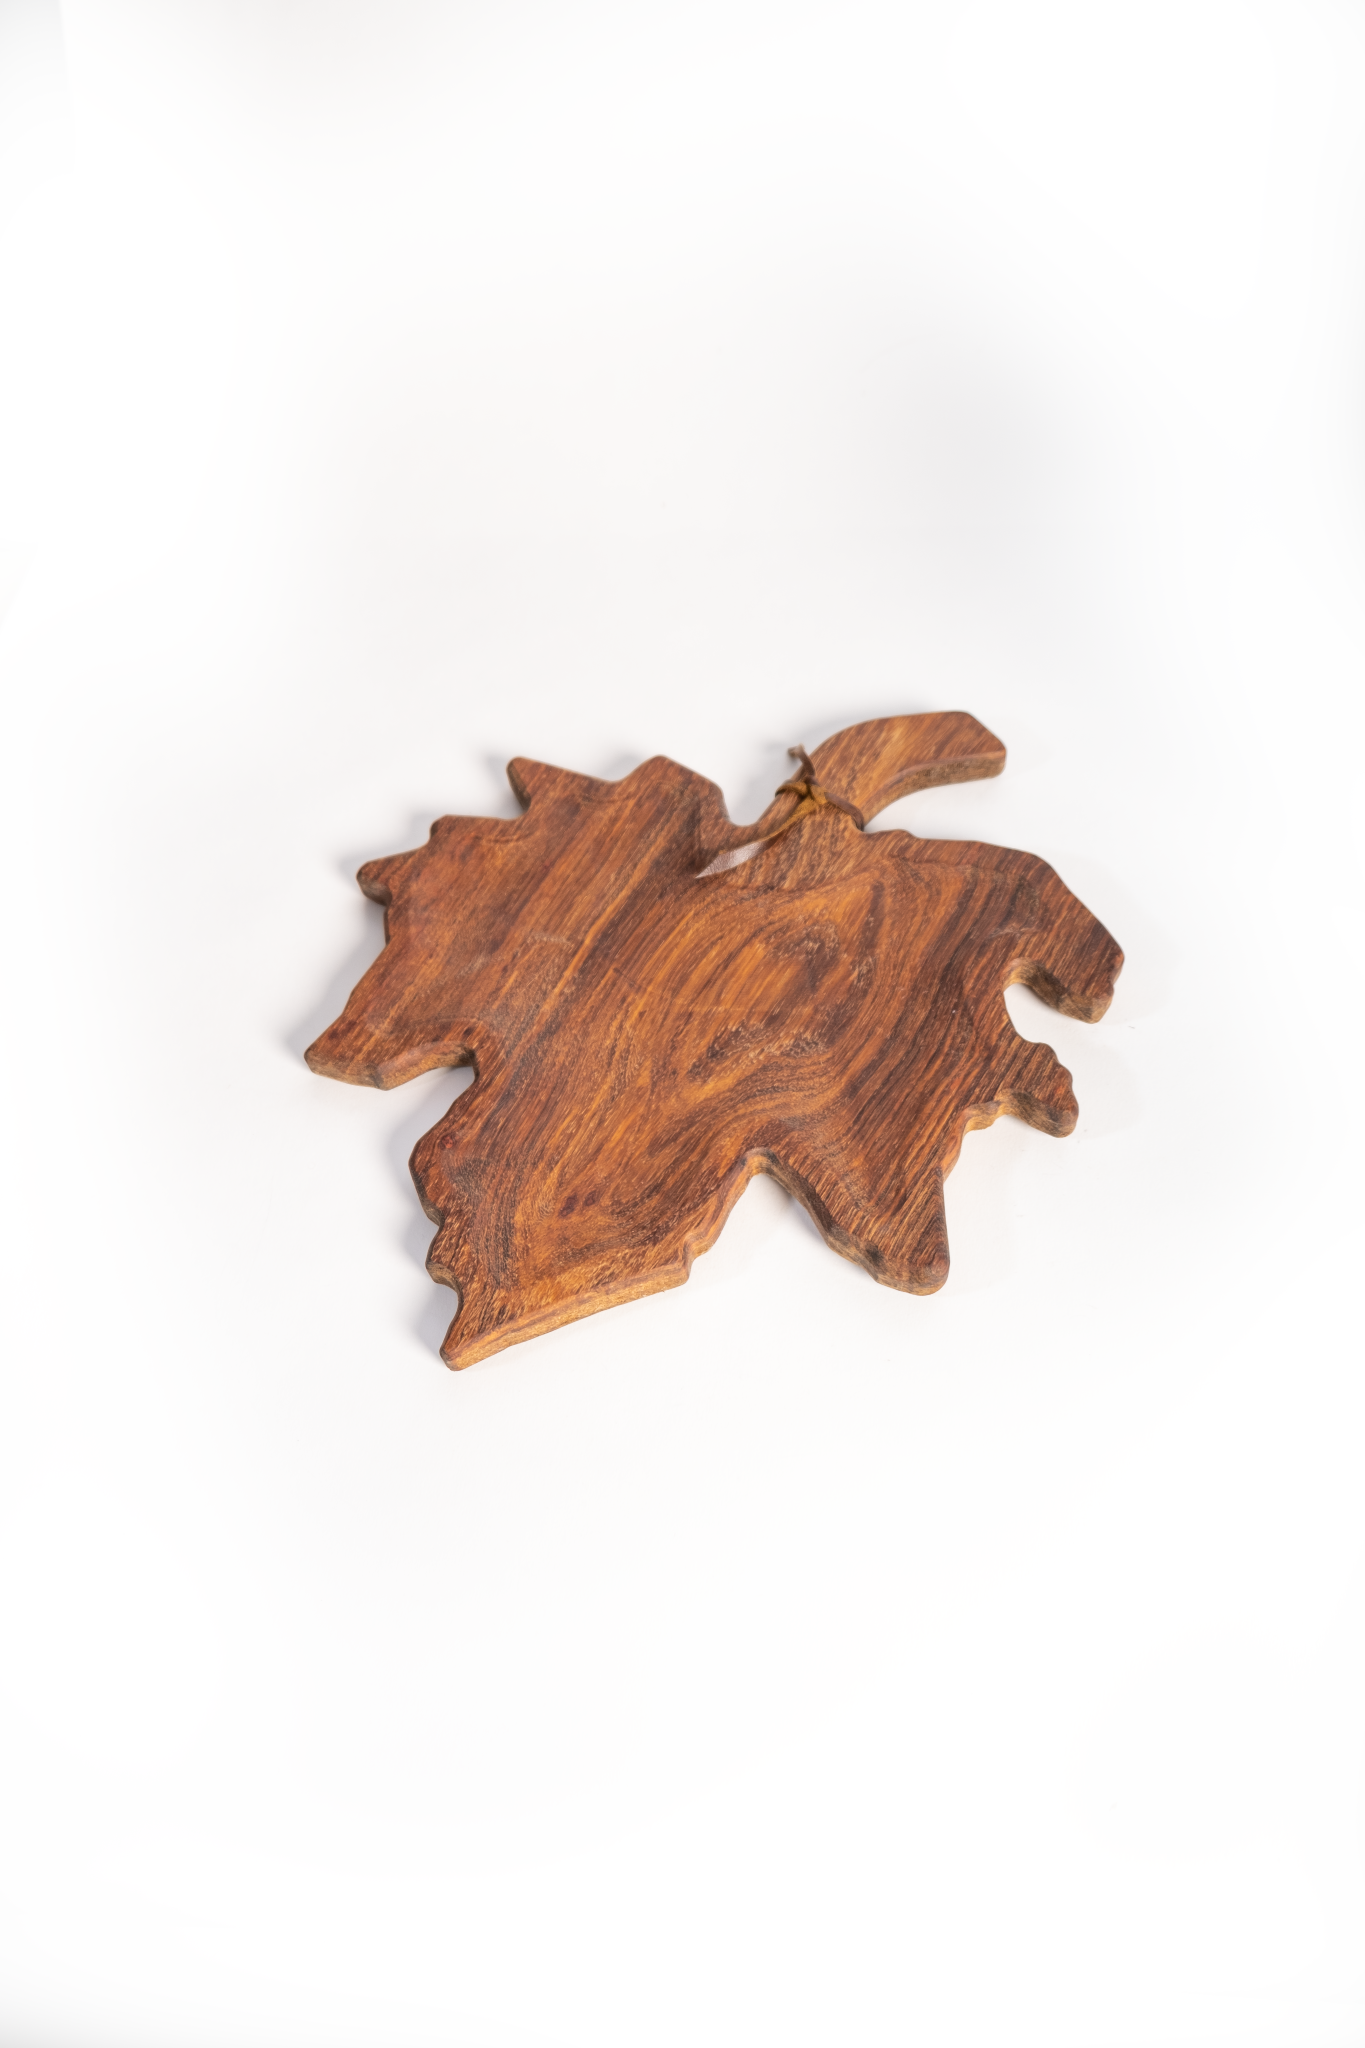 The Weinberg Logo shaped wooden cheese board